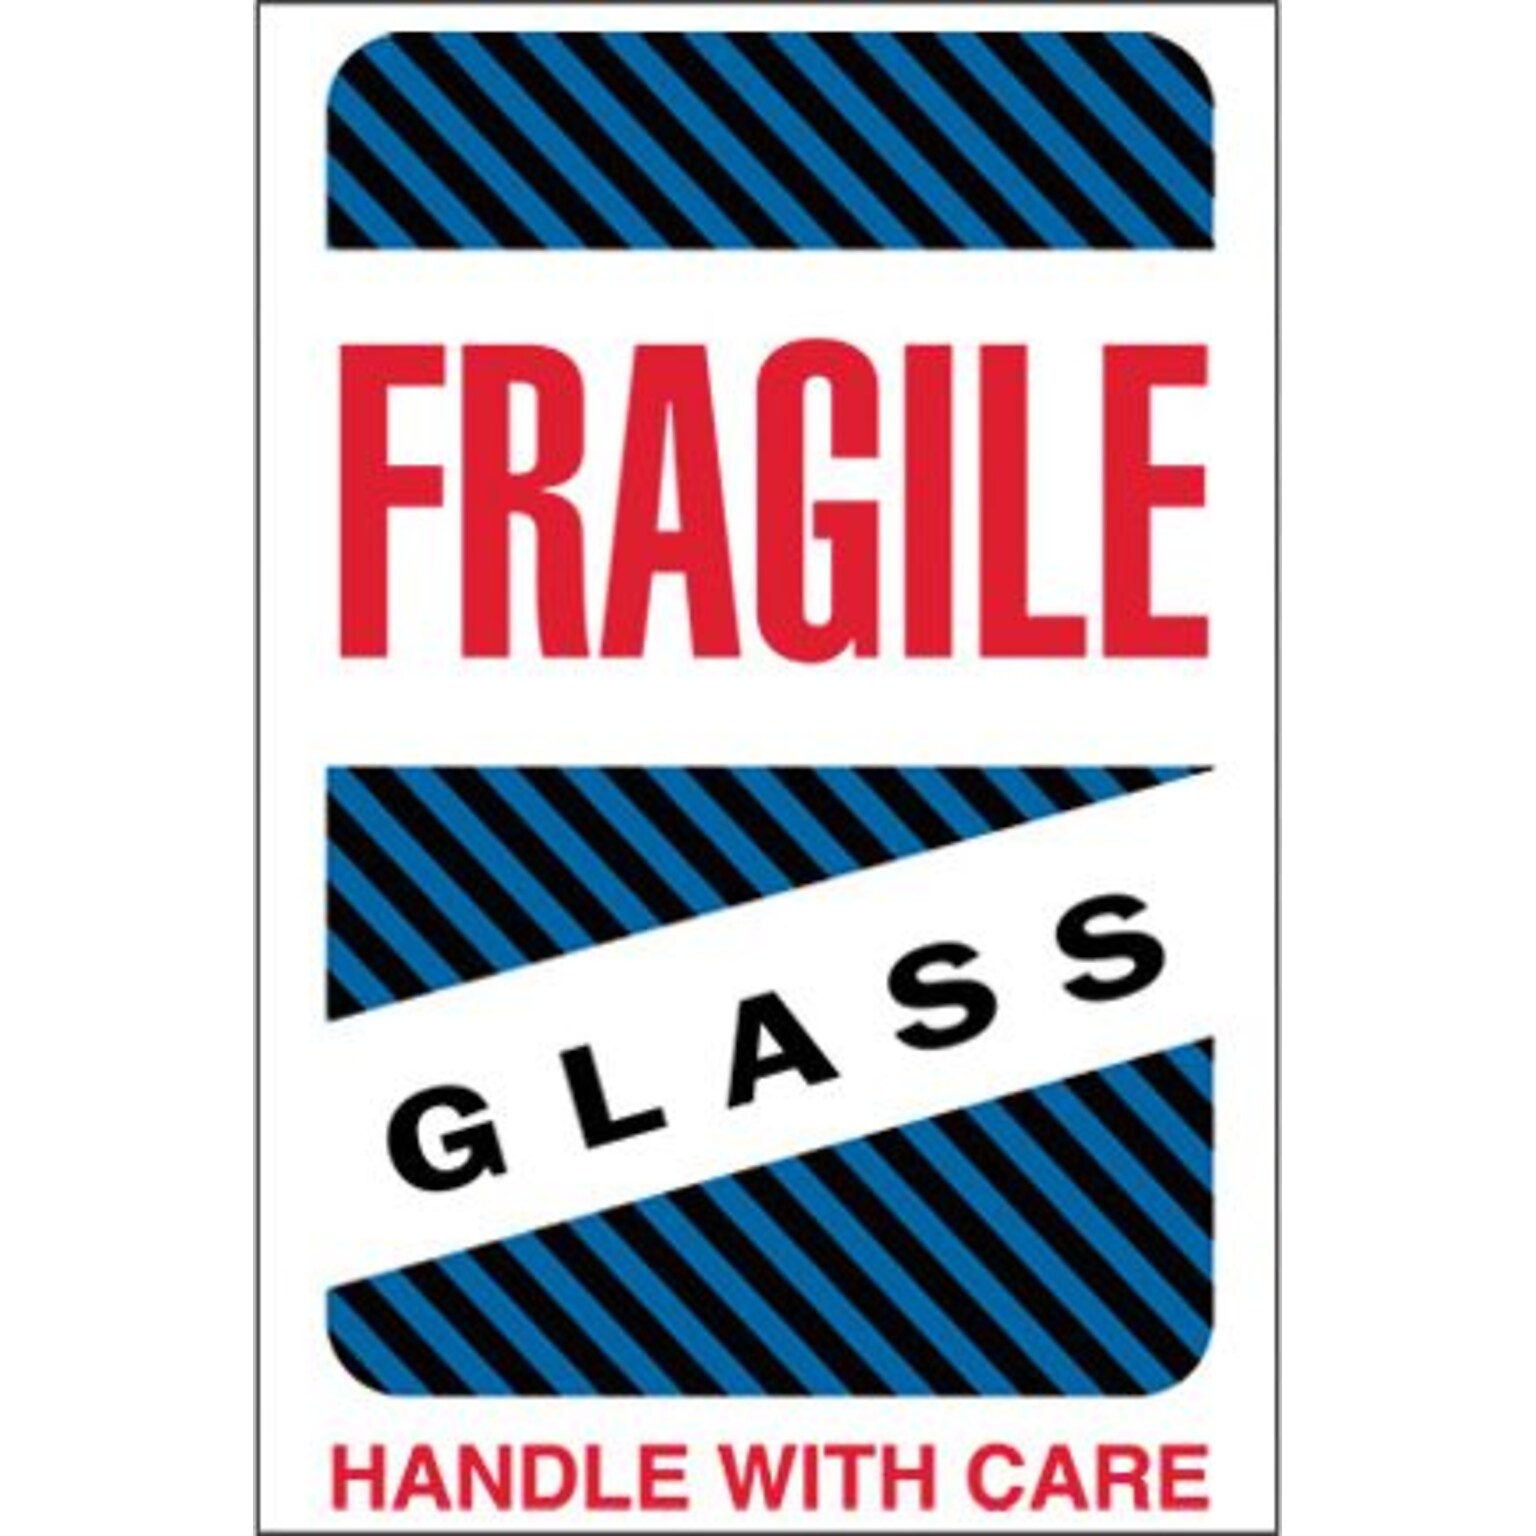 Tape Logic Fragile - Glass - Handle With Care Shipping Label, 4 x 6, 500/Roll